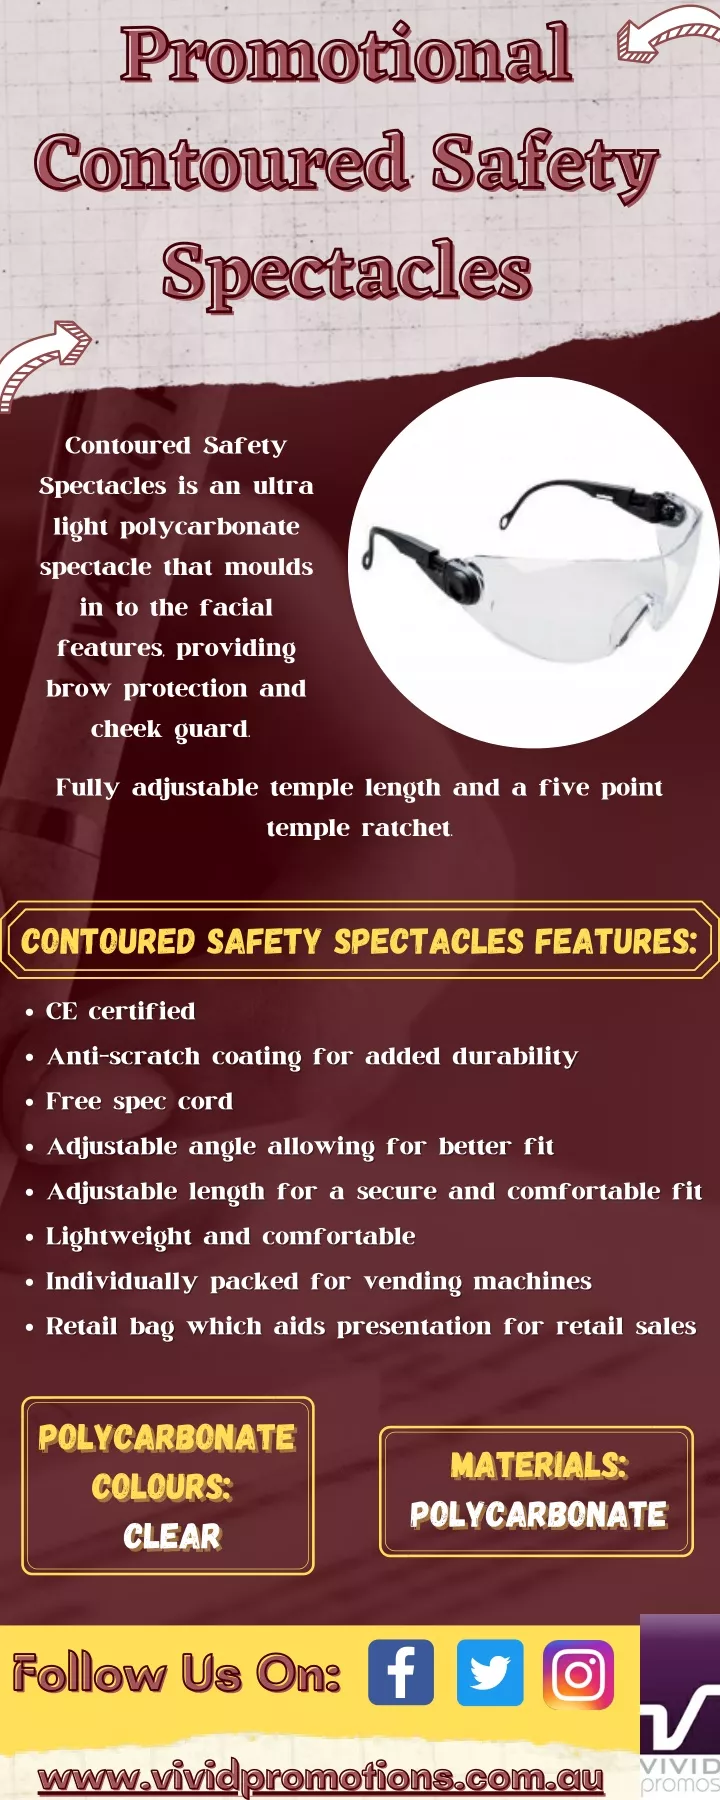 promotional contoured safety spectacles